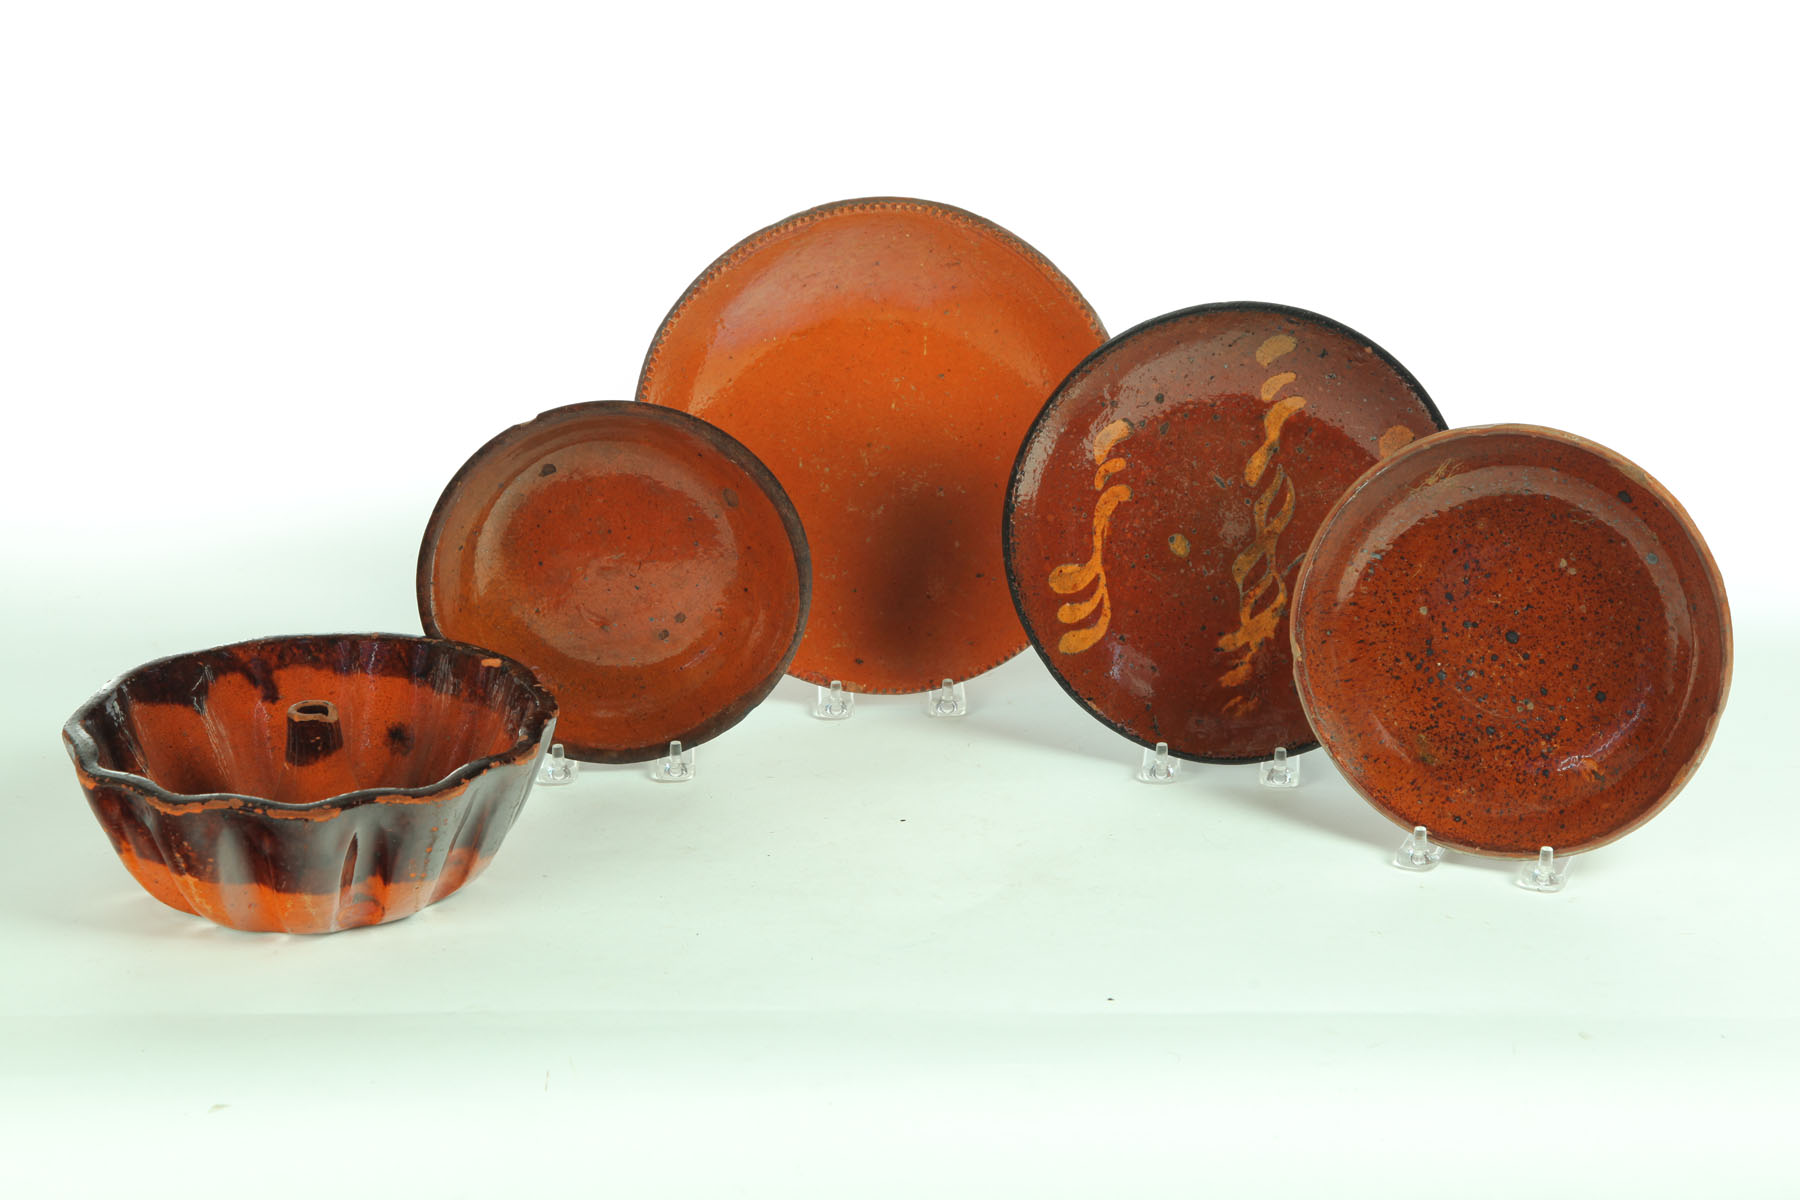 FIVE PIECES OF REDWARE.  American  19th